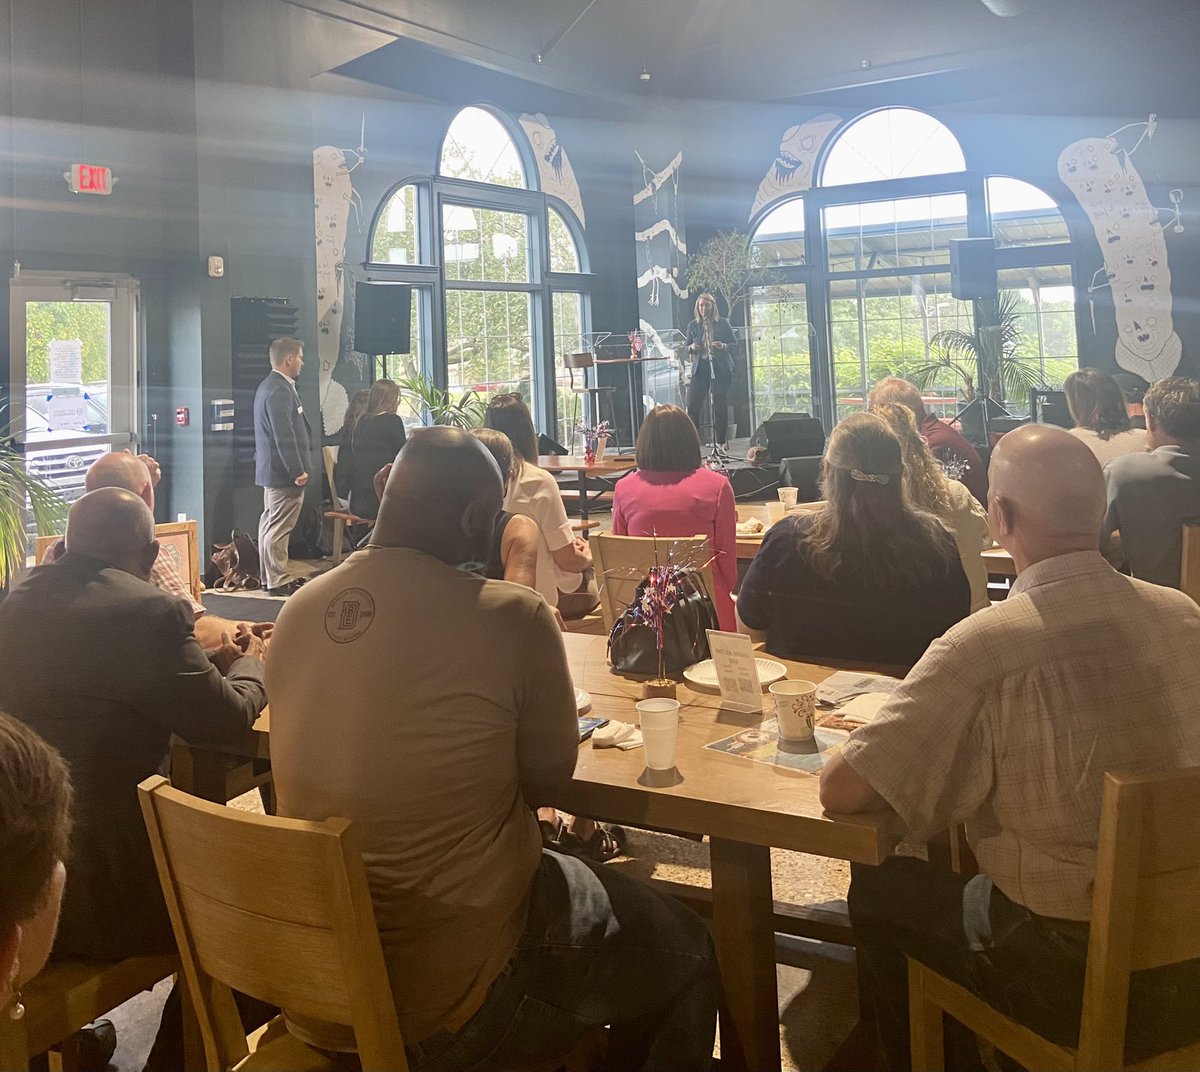 This morning, the Kent County Democrats came together for our unity breakfast. The message was clear: we are organized. We’re energized. We’re going to flip our state legislature. And we’re going to flip #MI03 - together.